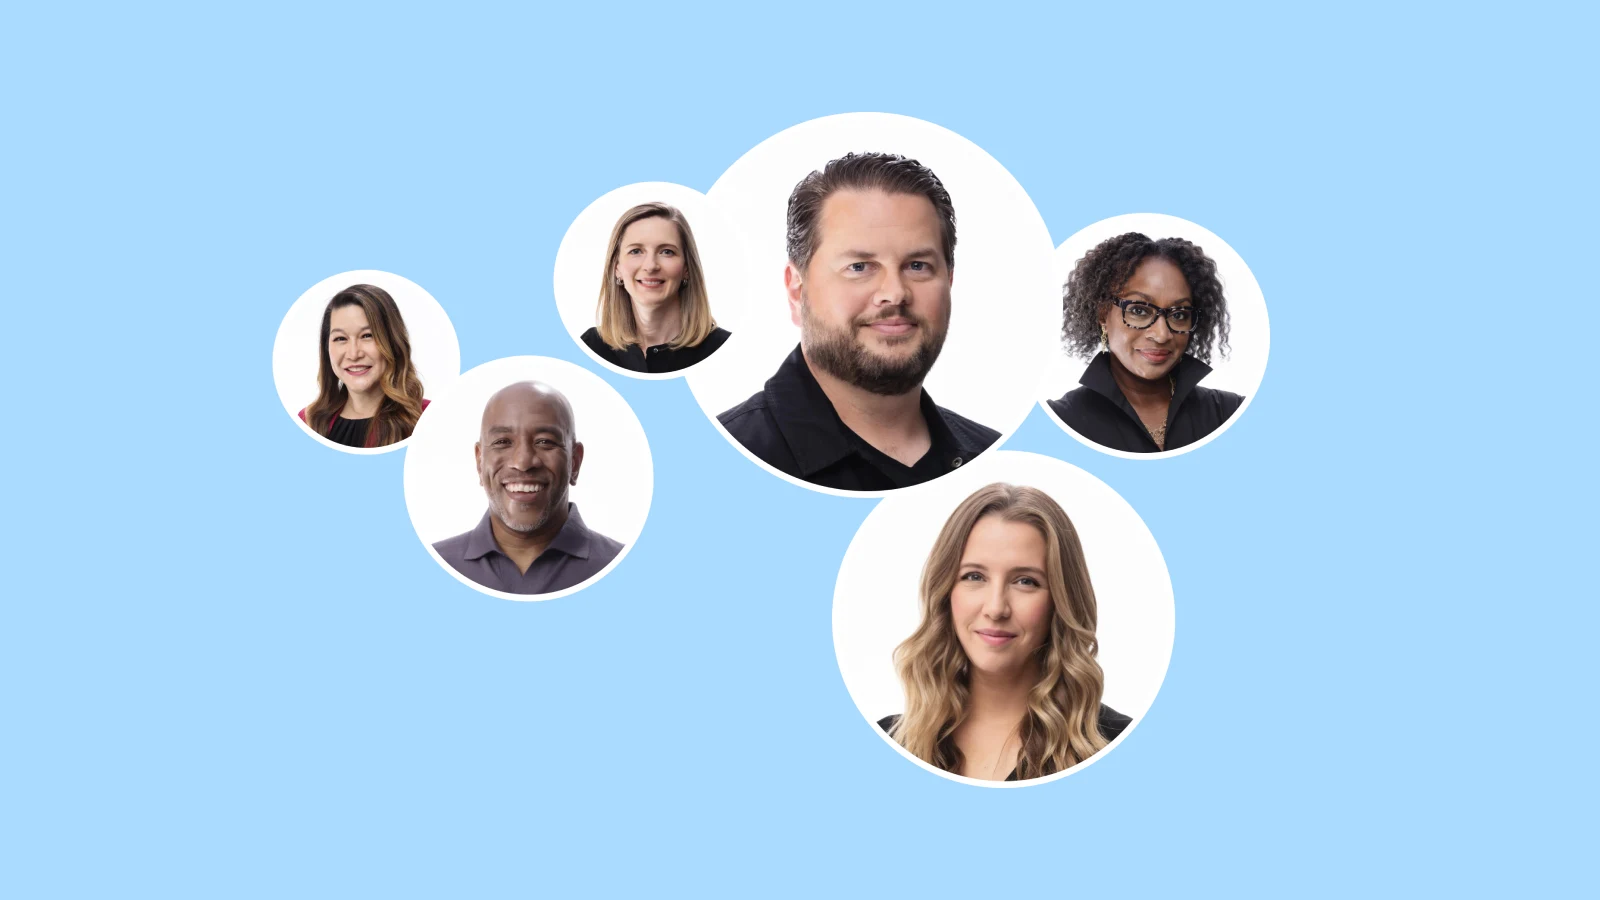 An image displaying the Pinterest leadership team, represented by headshots, gathered in a circular formation